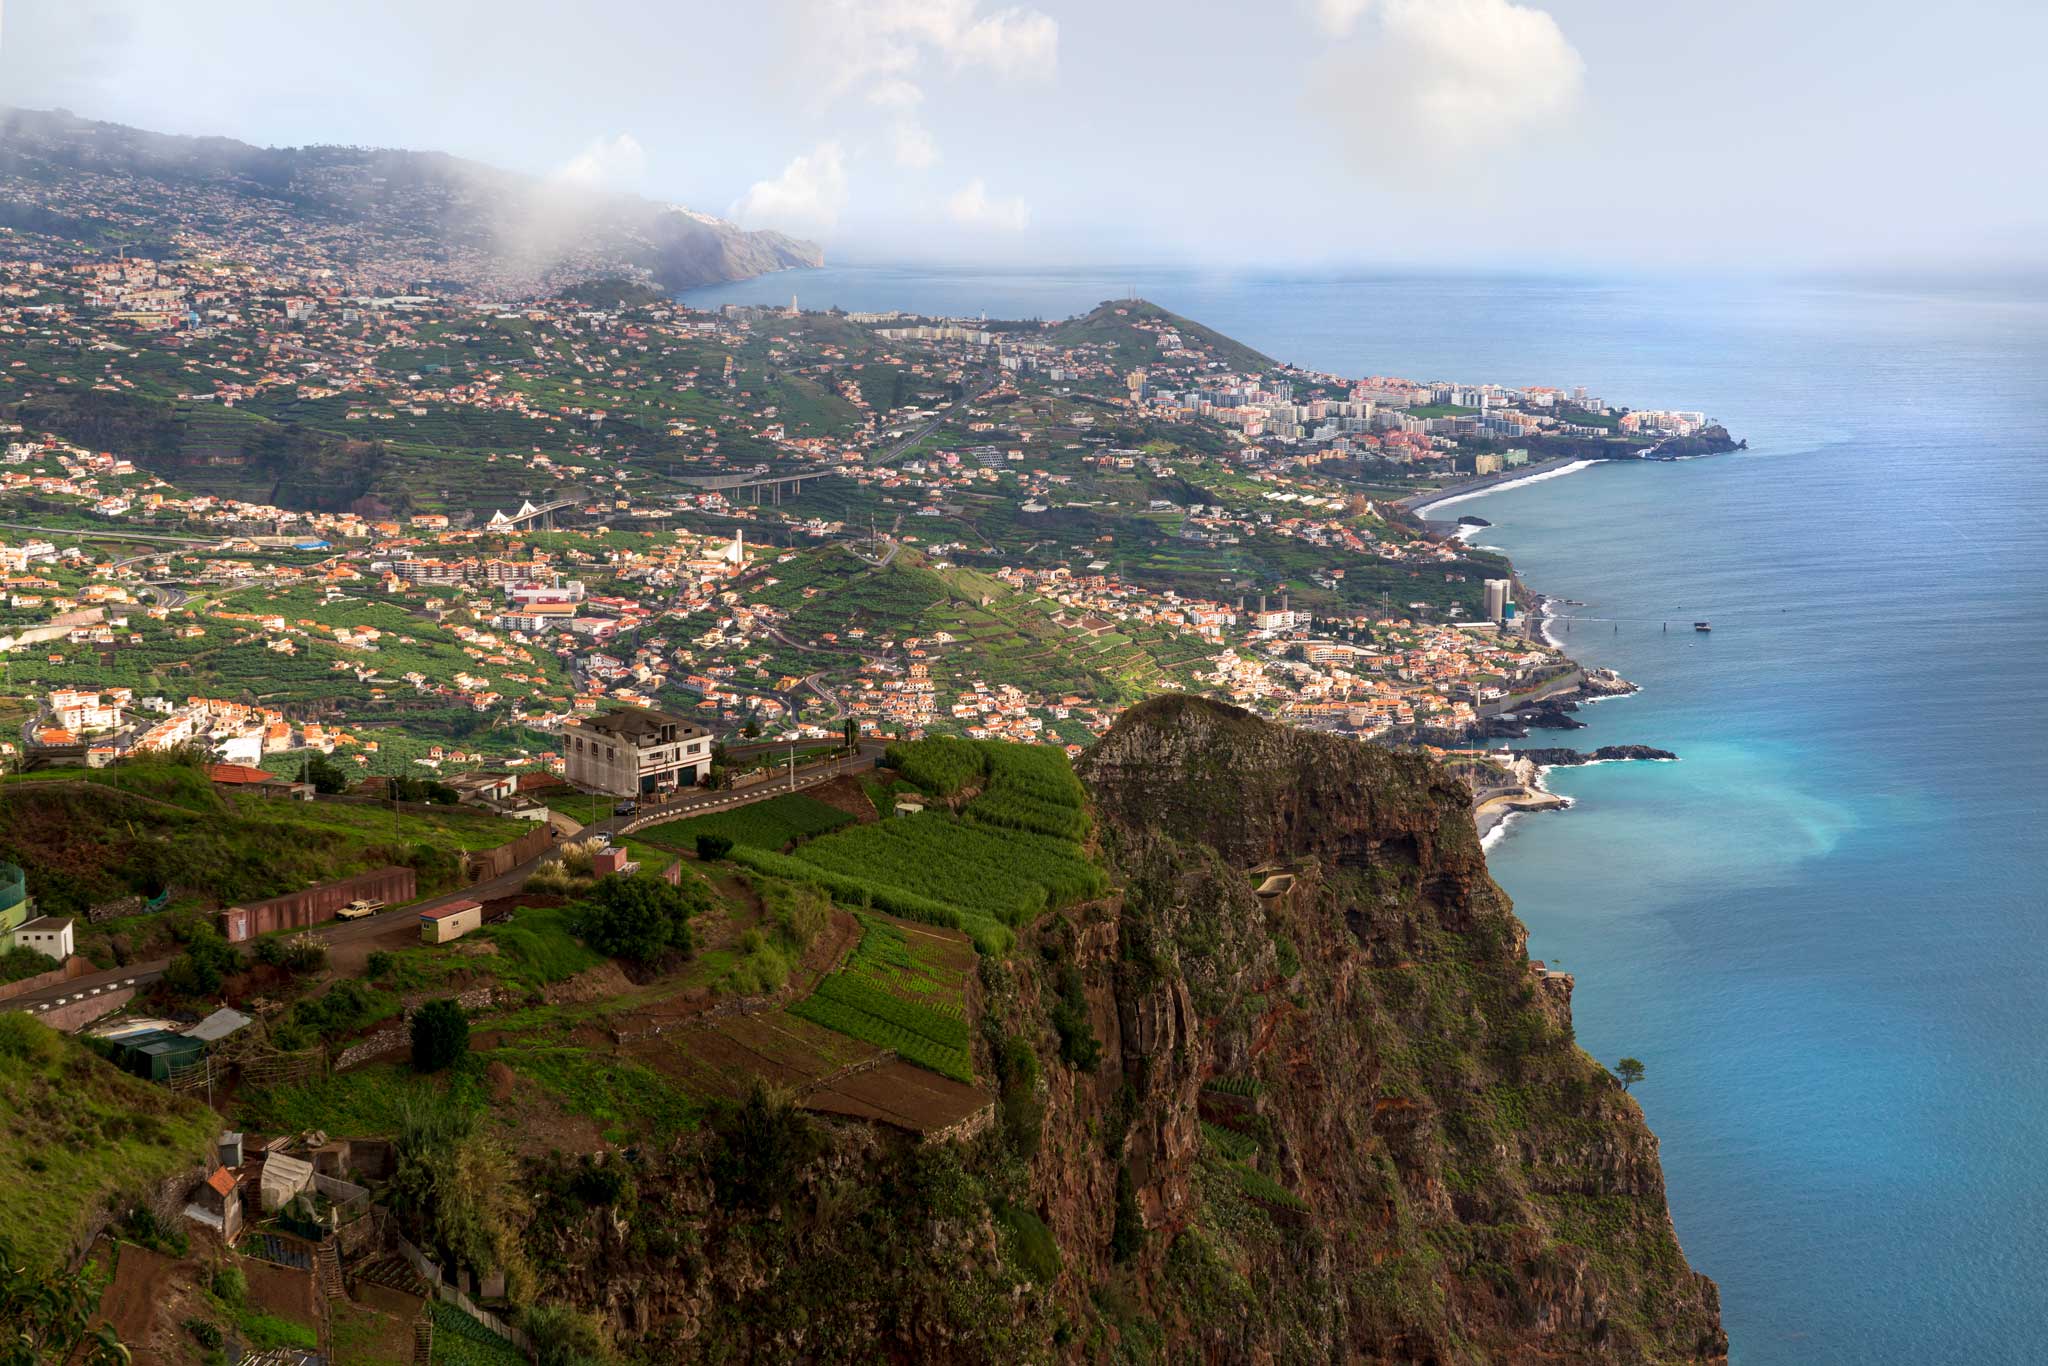 The view Cabo Girao across to Funchal